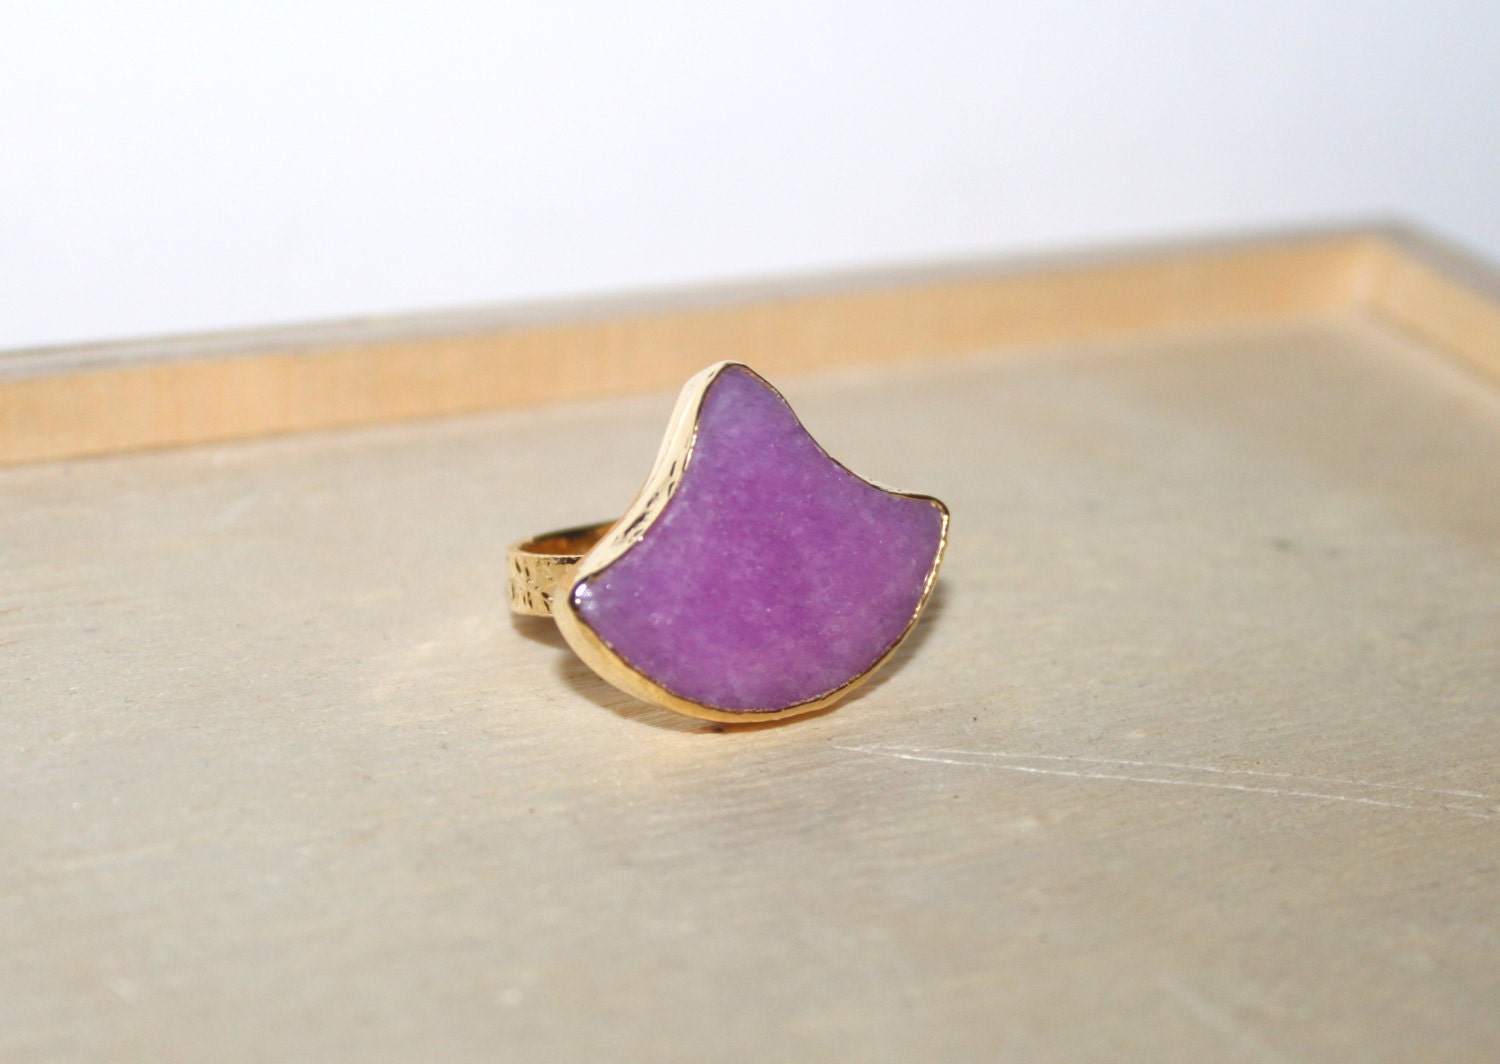 Lilac Purple Agate Adjustable Ring / Statement Jewelry / Gold